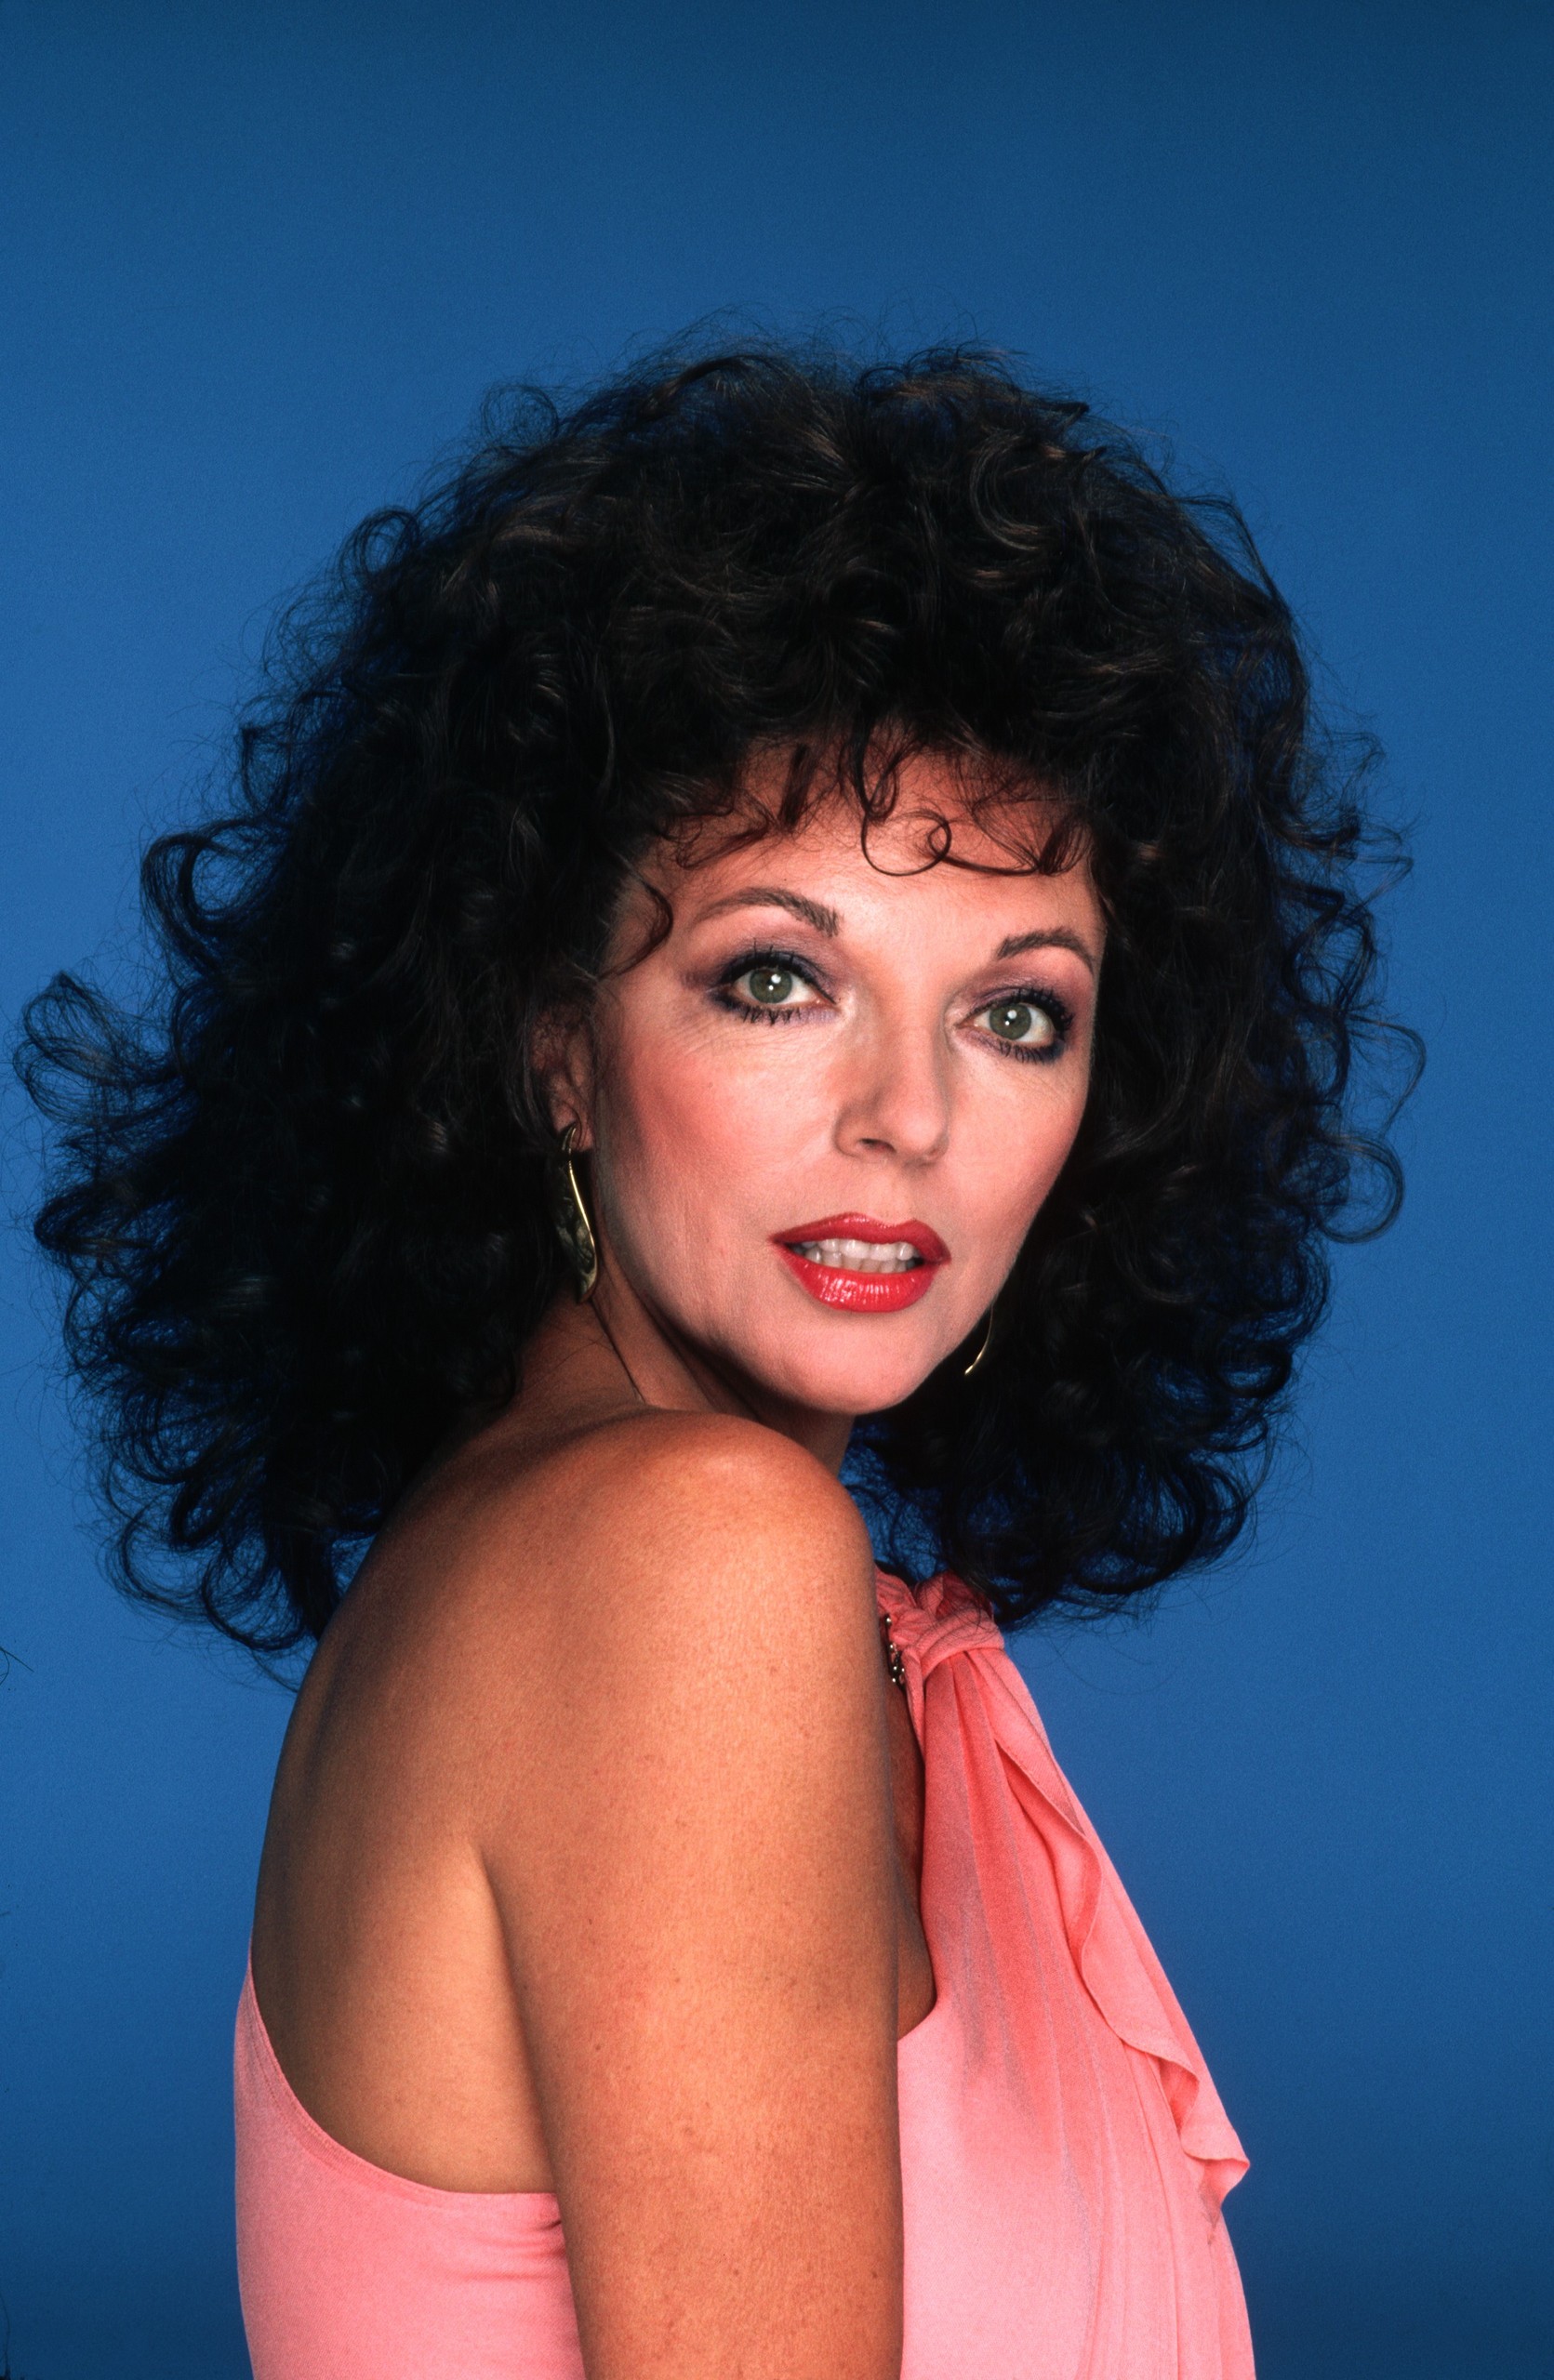 Joan Collins Image HD Wallpaper And